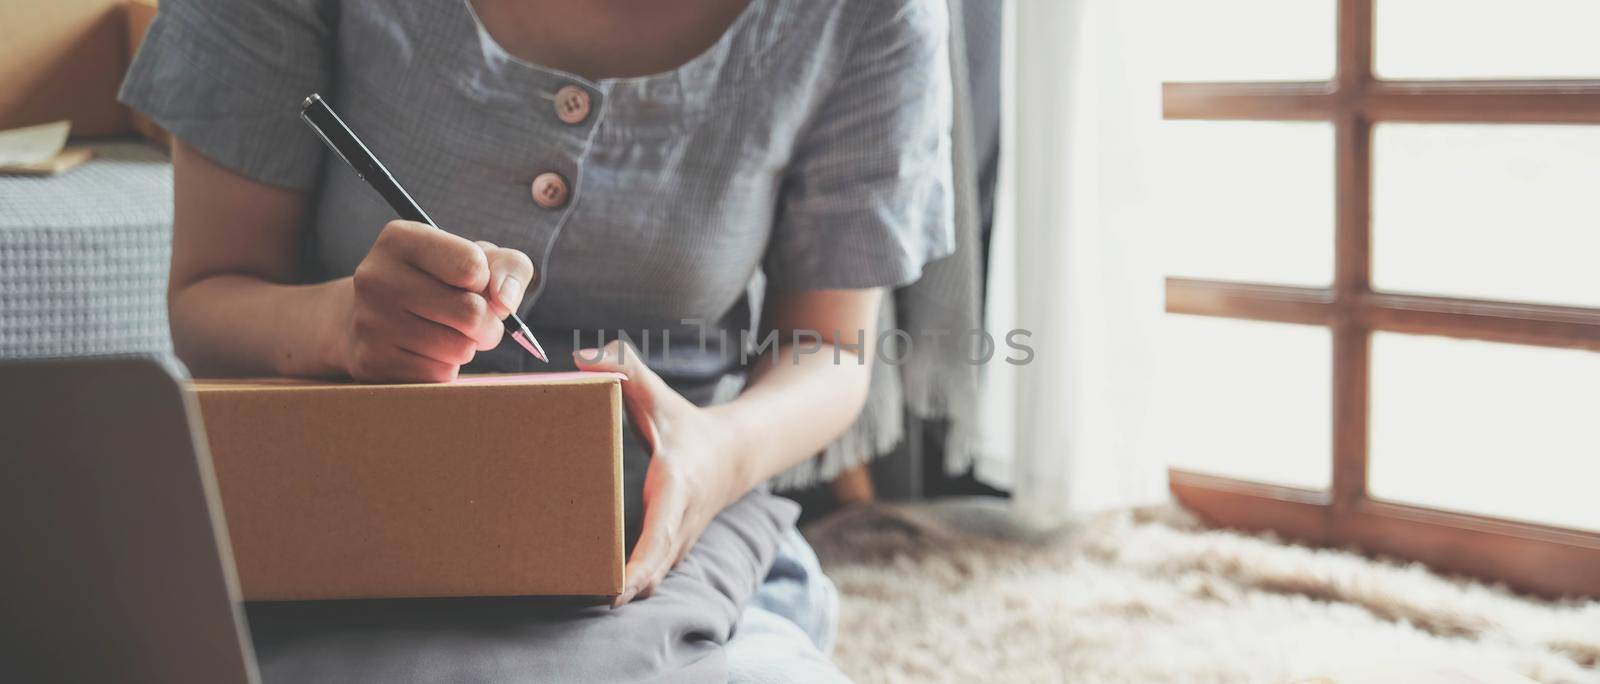 Small Entrepreneurs Start A Home Business By Arranging Goods With Brown Parcel Boxes, Small Home Business Startup Ideas. by wichayada